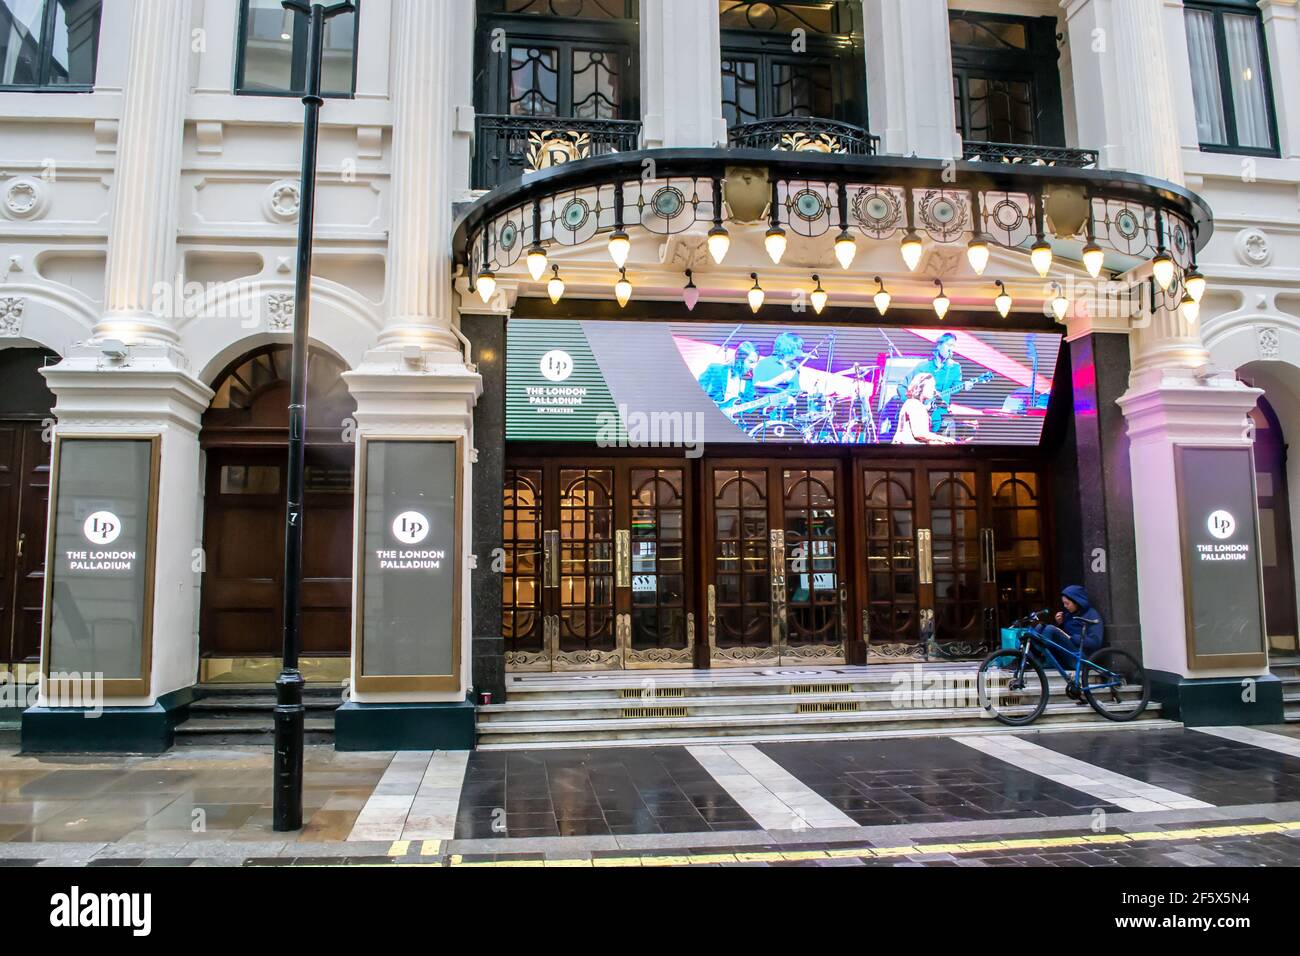 The London Palladium Theatre High Resolution Stock Photography and Images -  Alamy